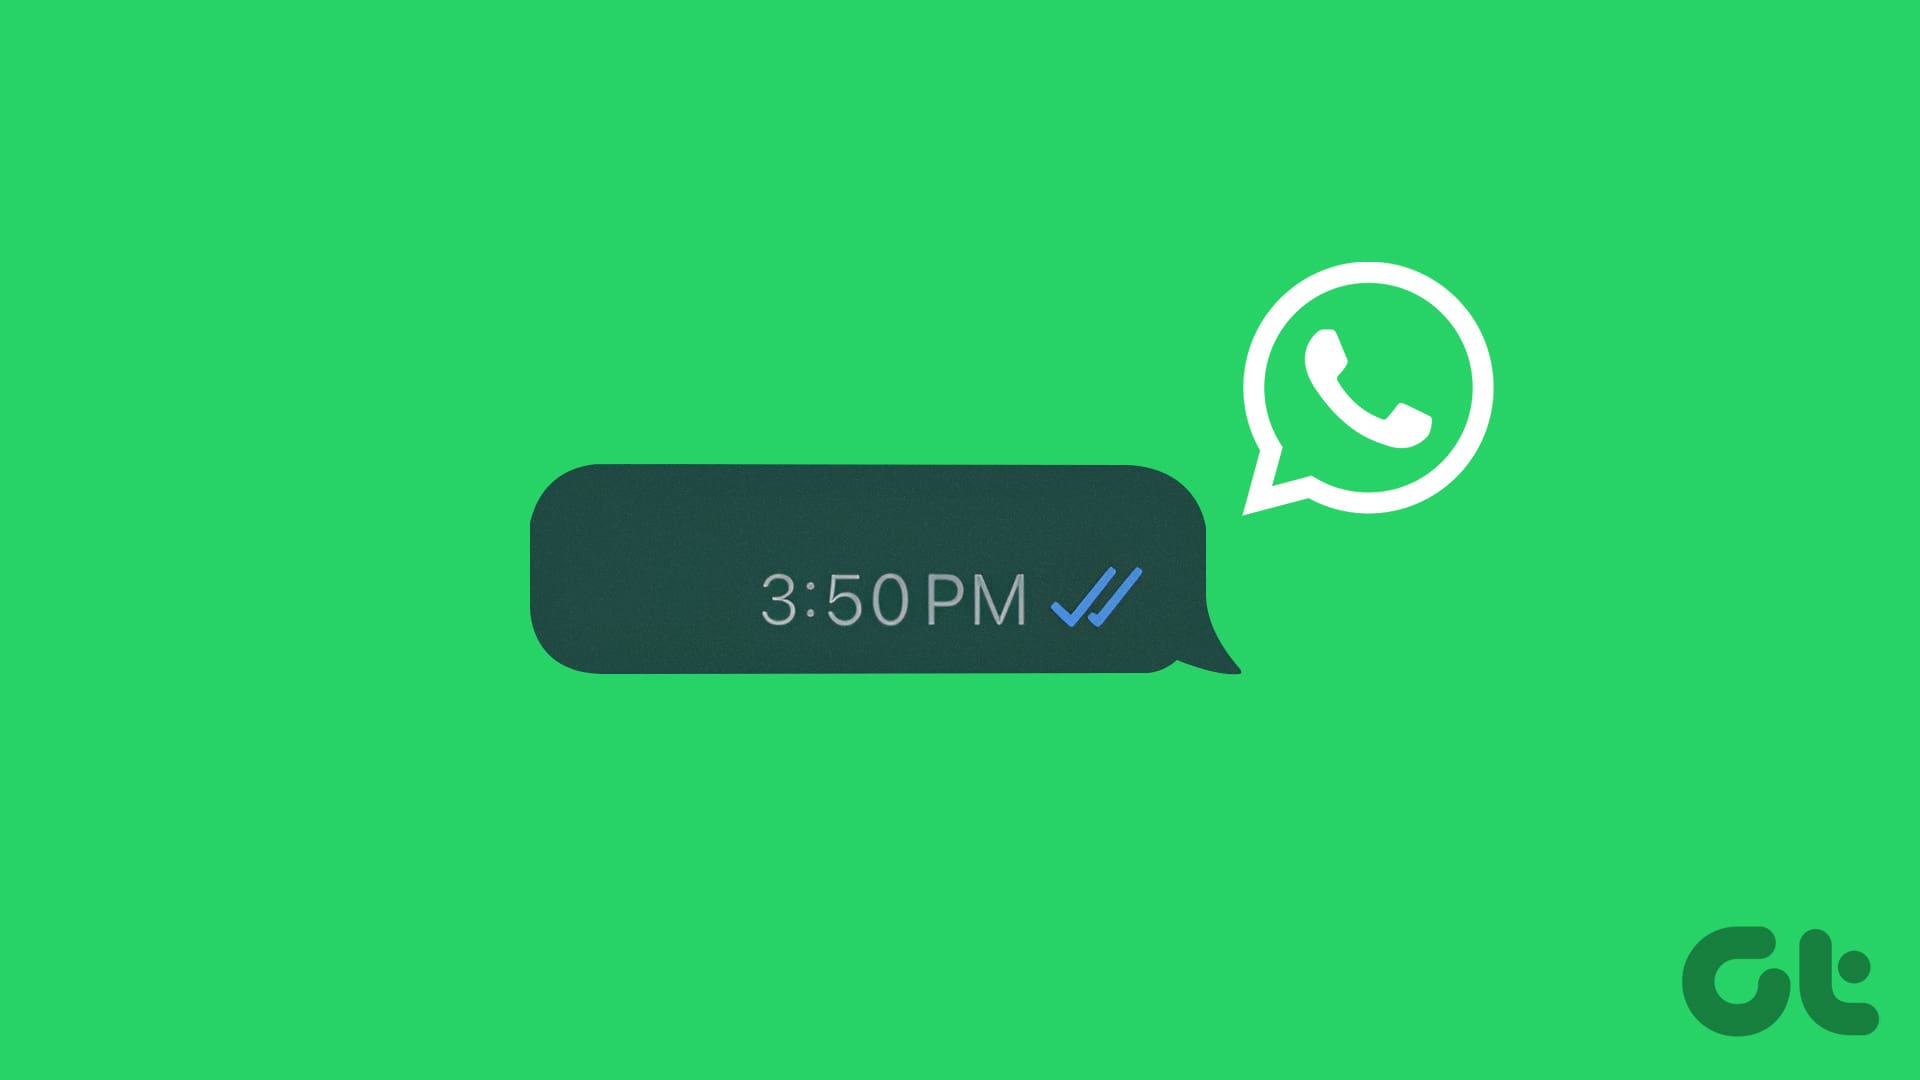 How to Send a Blank Message in WhatsApp